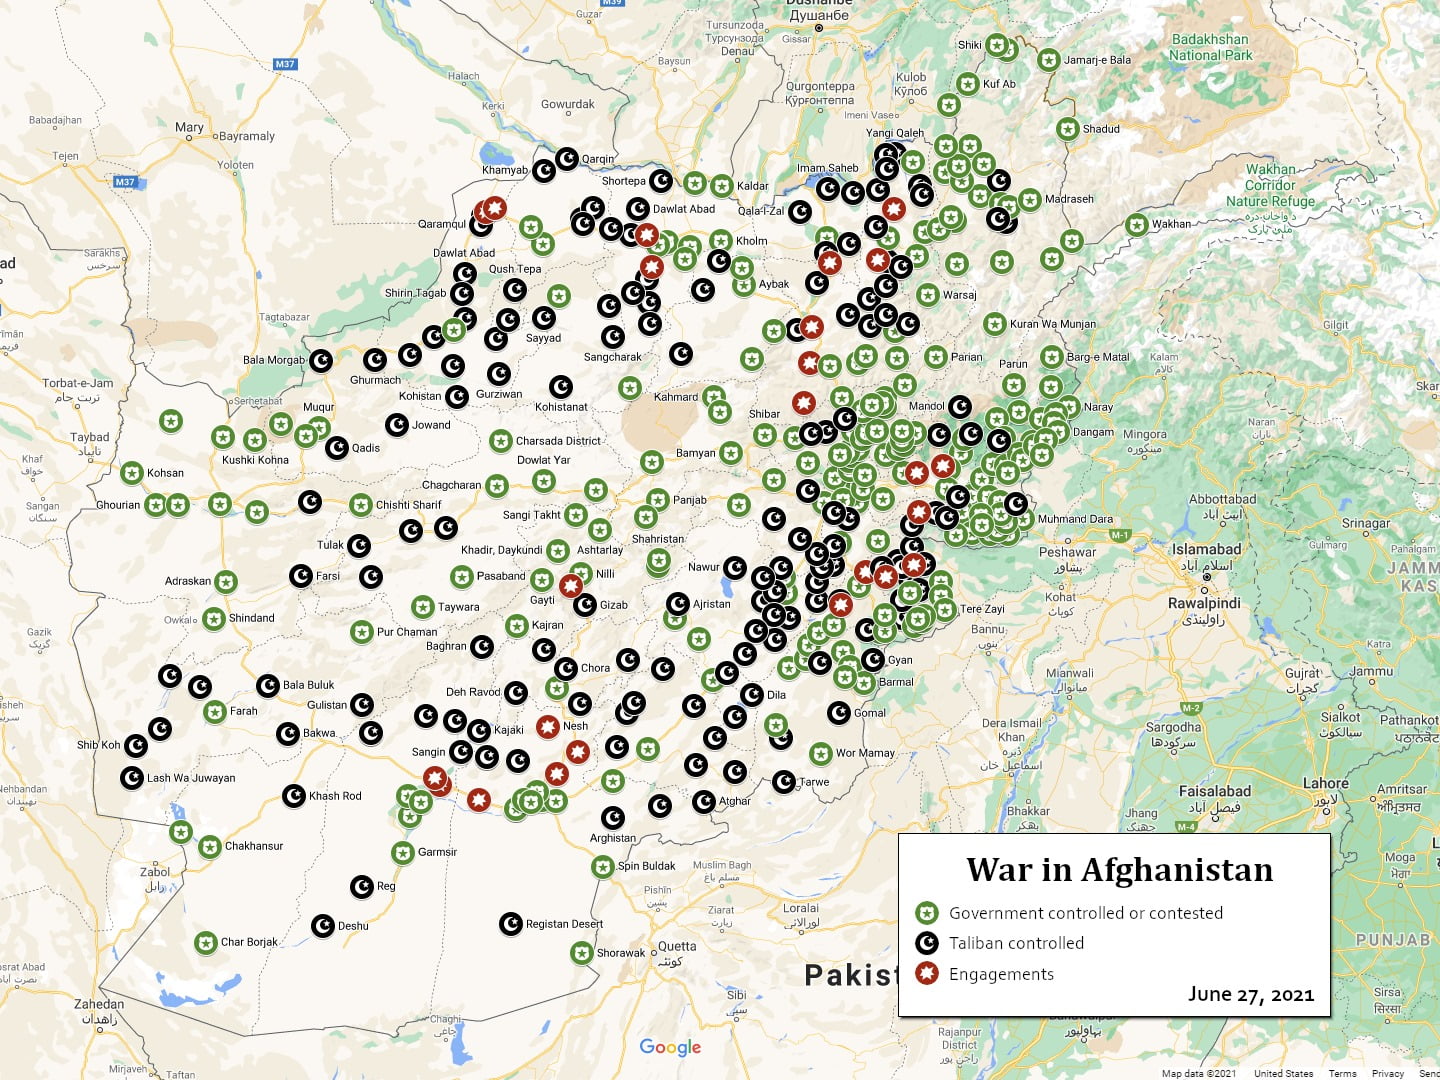 War in Afghanistan map for June 27, 2021